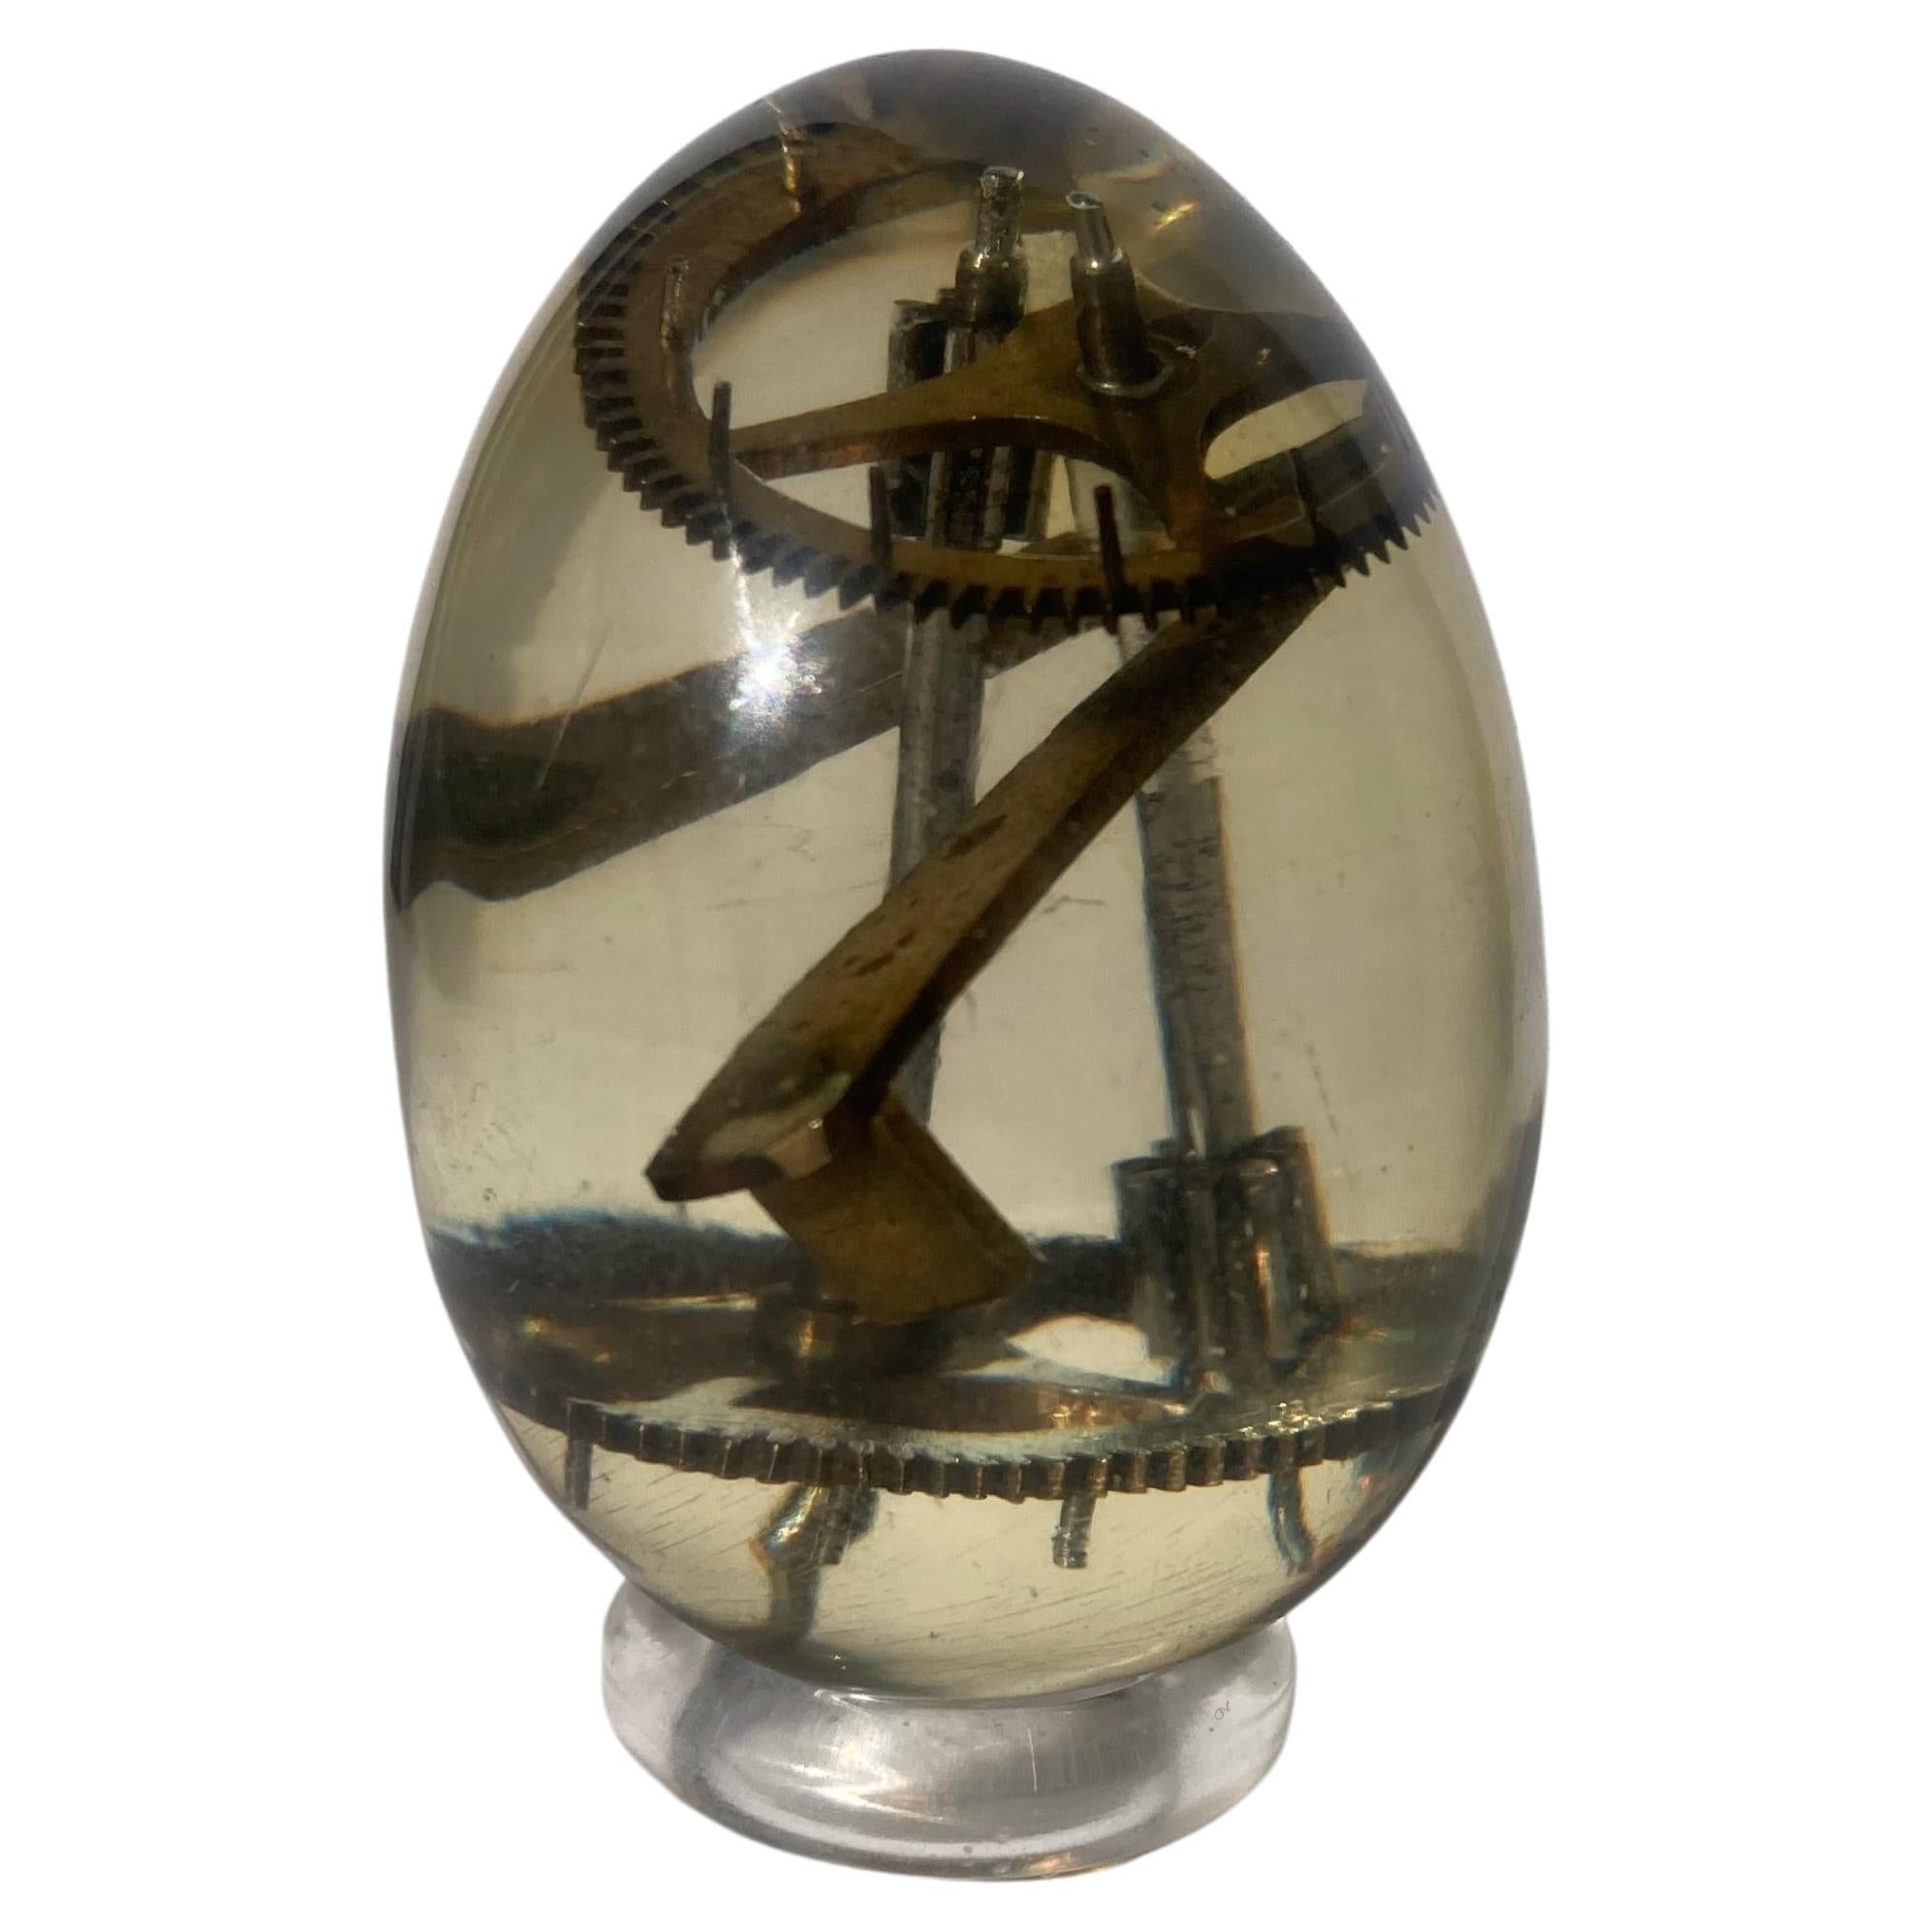 Resin Egg with Clock Parts on Pierre GIRAUDON  Sculpture /Ornament / Paperweight For Sale